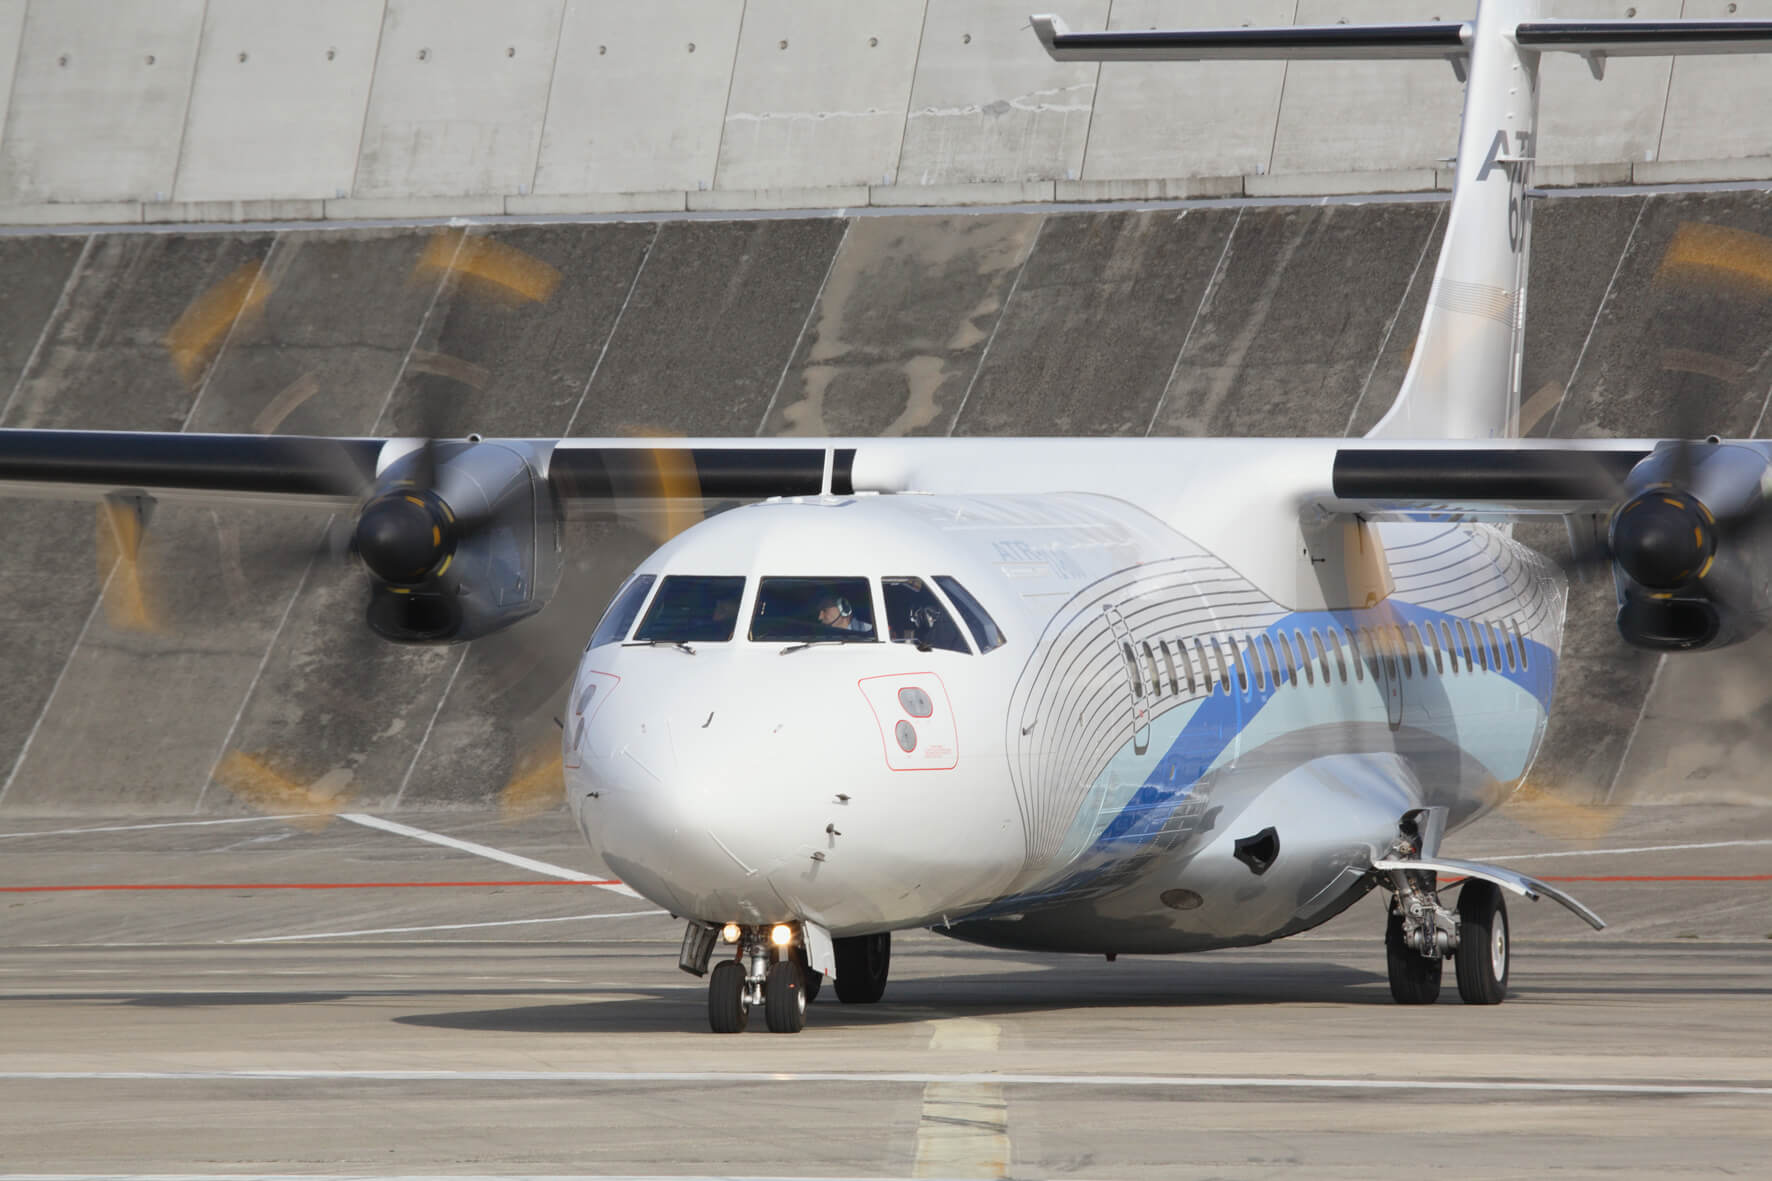 StandardAero awarded eight-year agreement to provide PW127M engine MRO services for Far Eastern Air Transport fleet of ATR72-600s